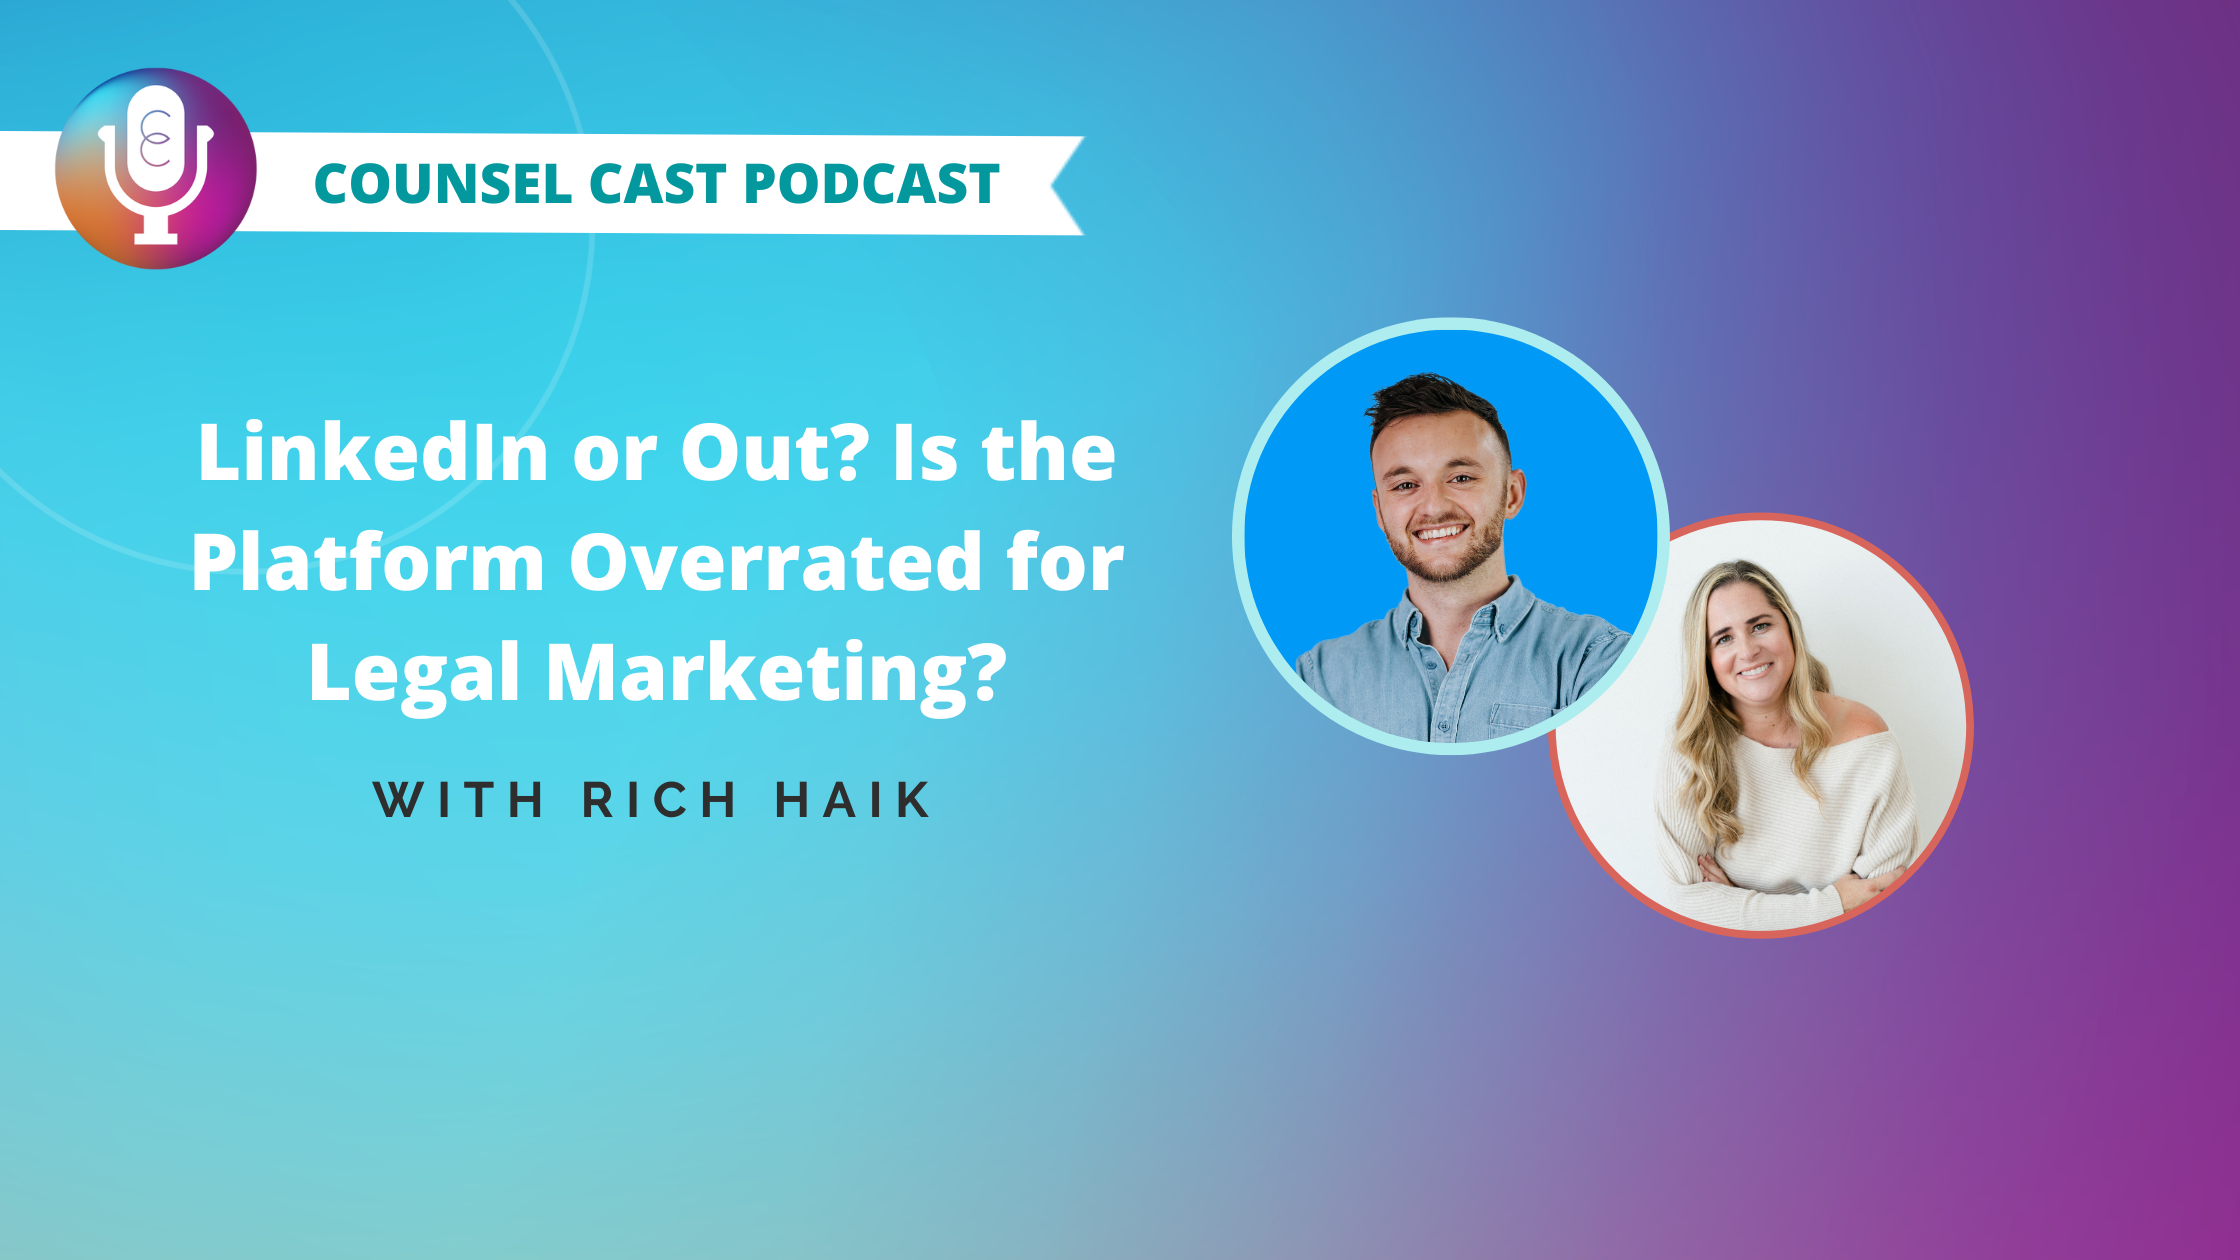 LinkedIn or Out? Is the Platform Overrated for Legal Marketing? with Rich Haik